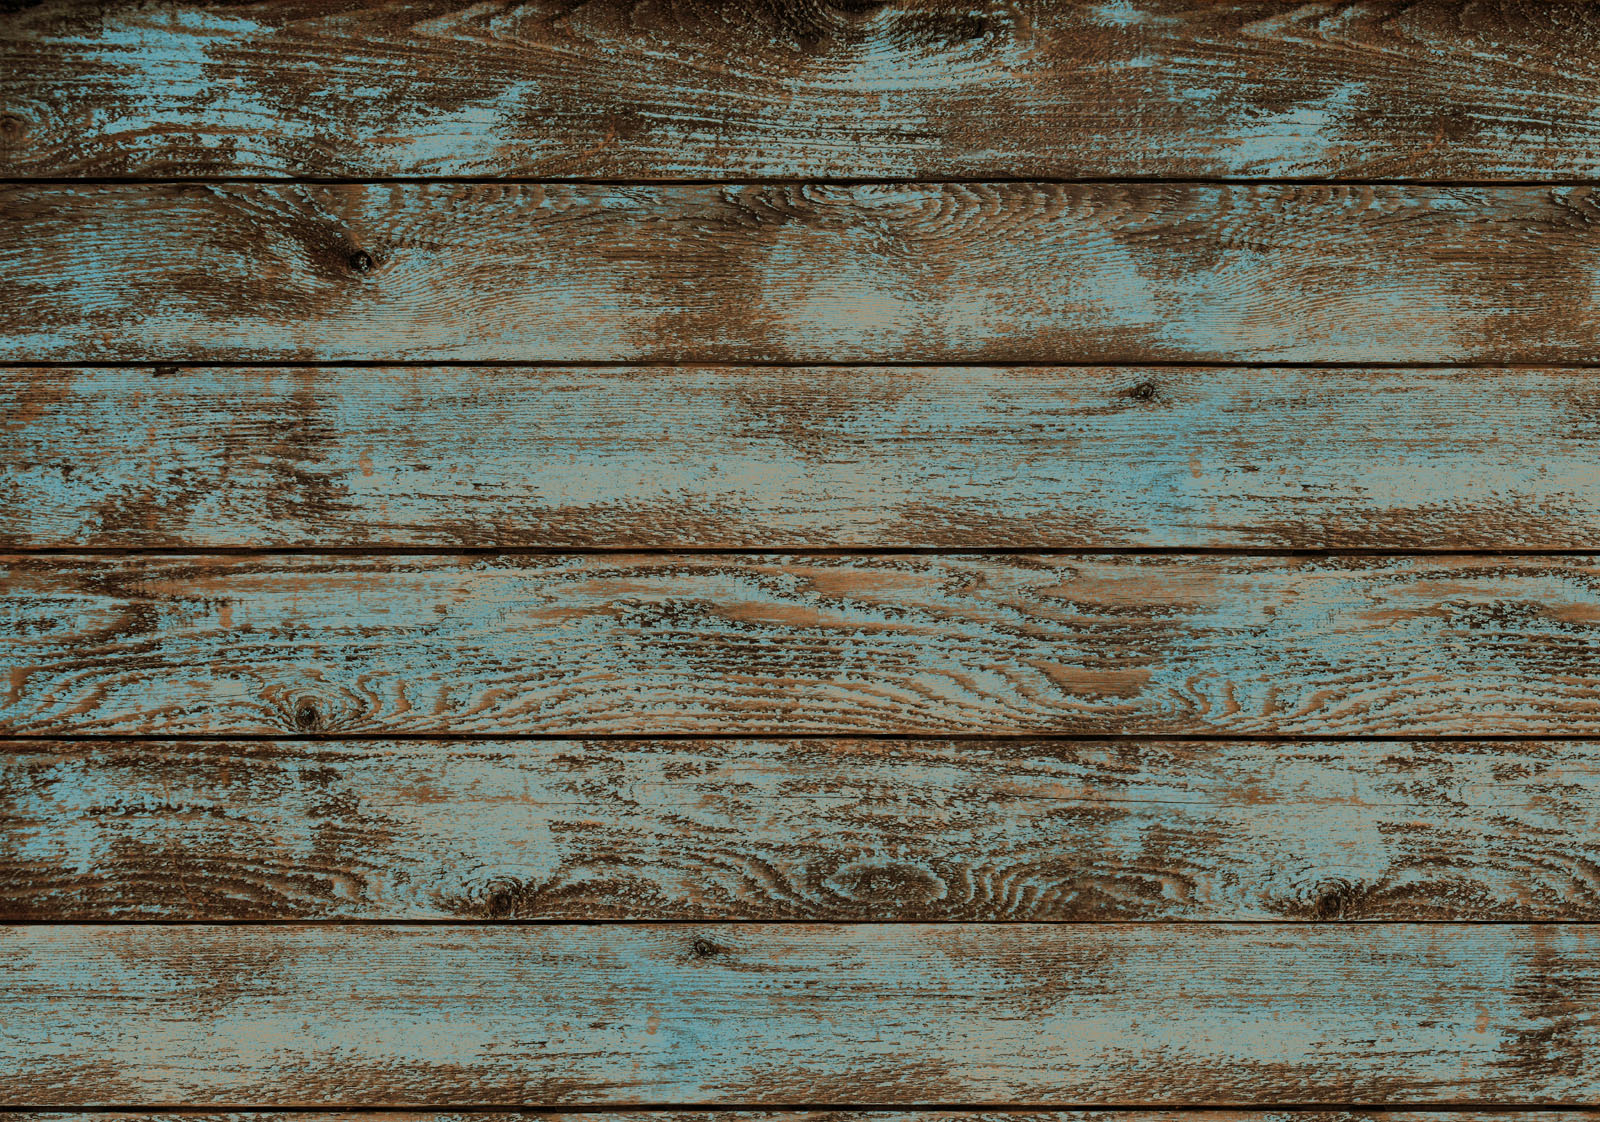 Barn Wood At The Galleria